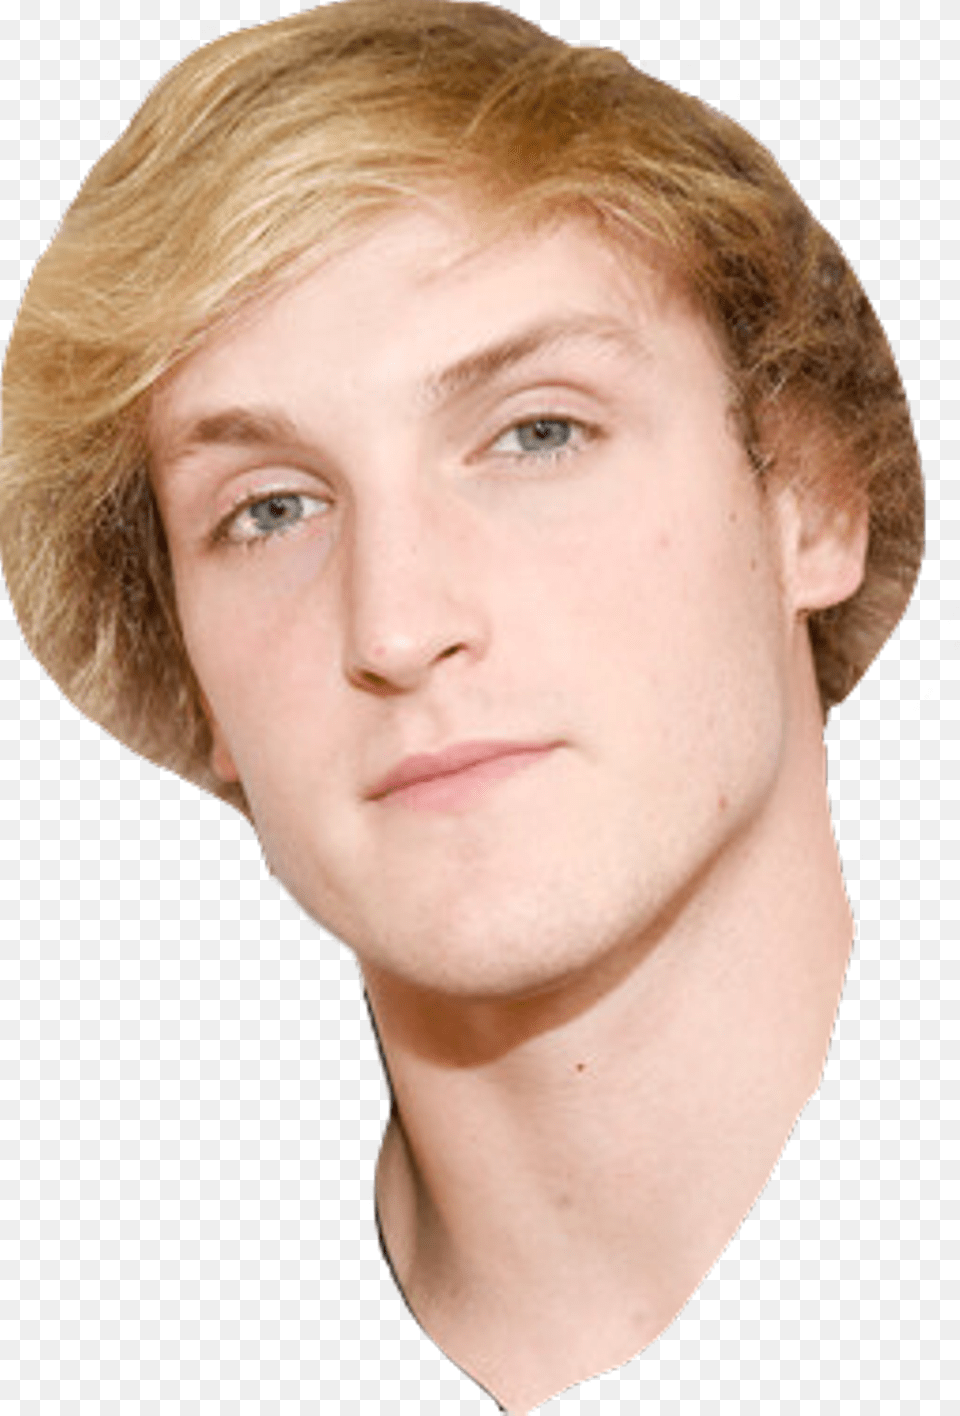 Loganpaul Freetoedit Sticker By Logan Paul Face No Background, Adult, Photography, Person, Man Png Image